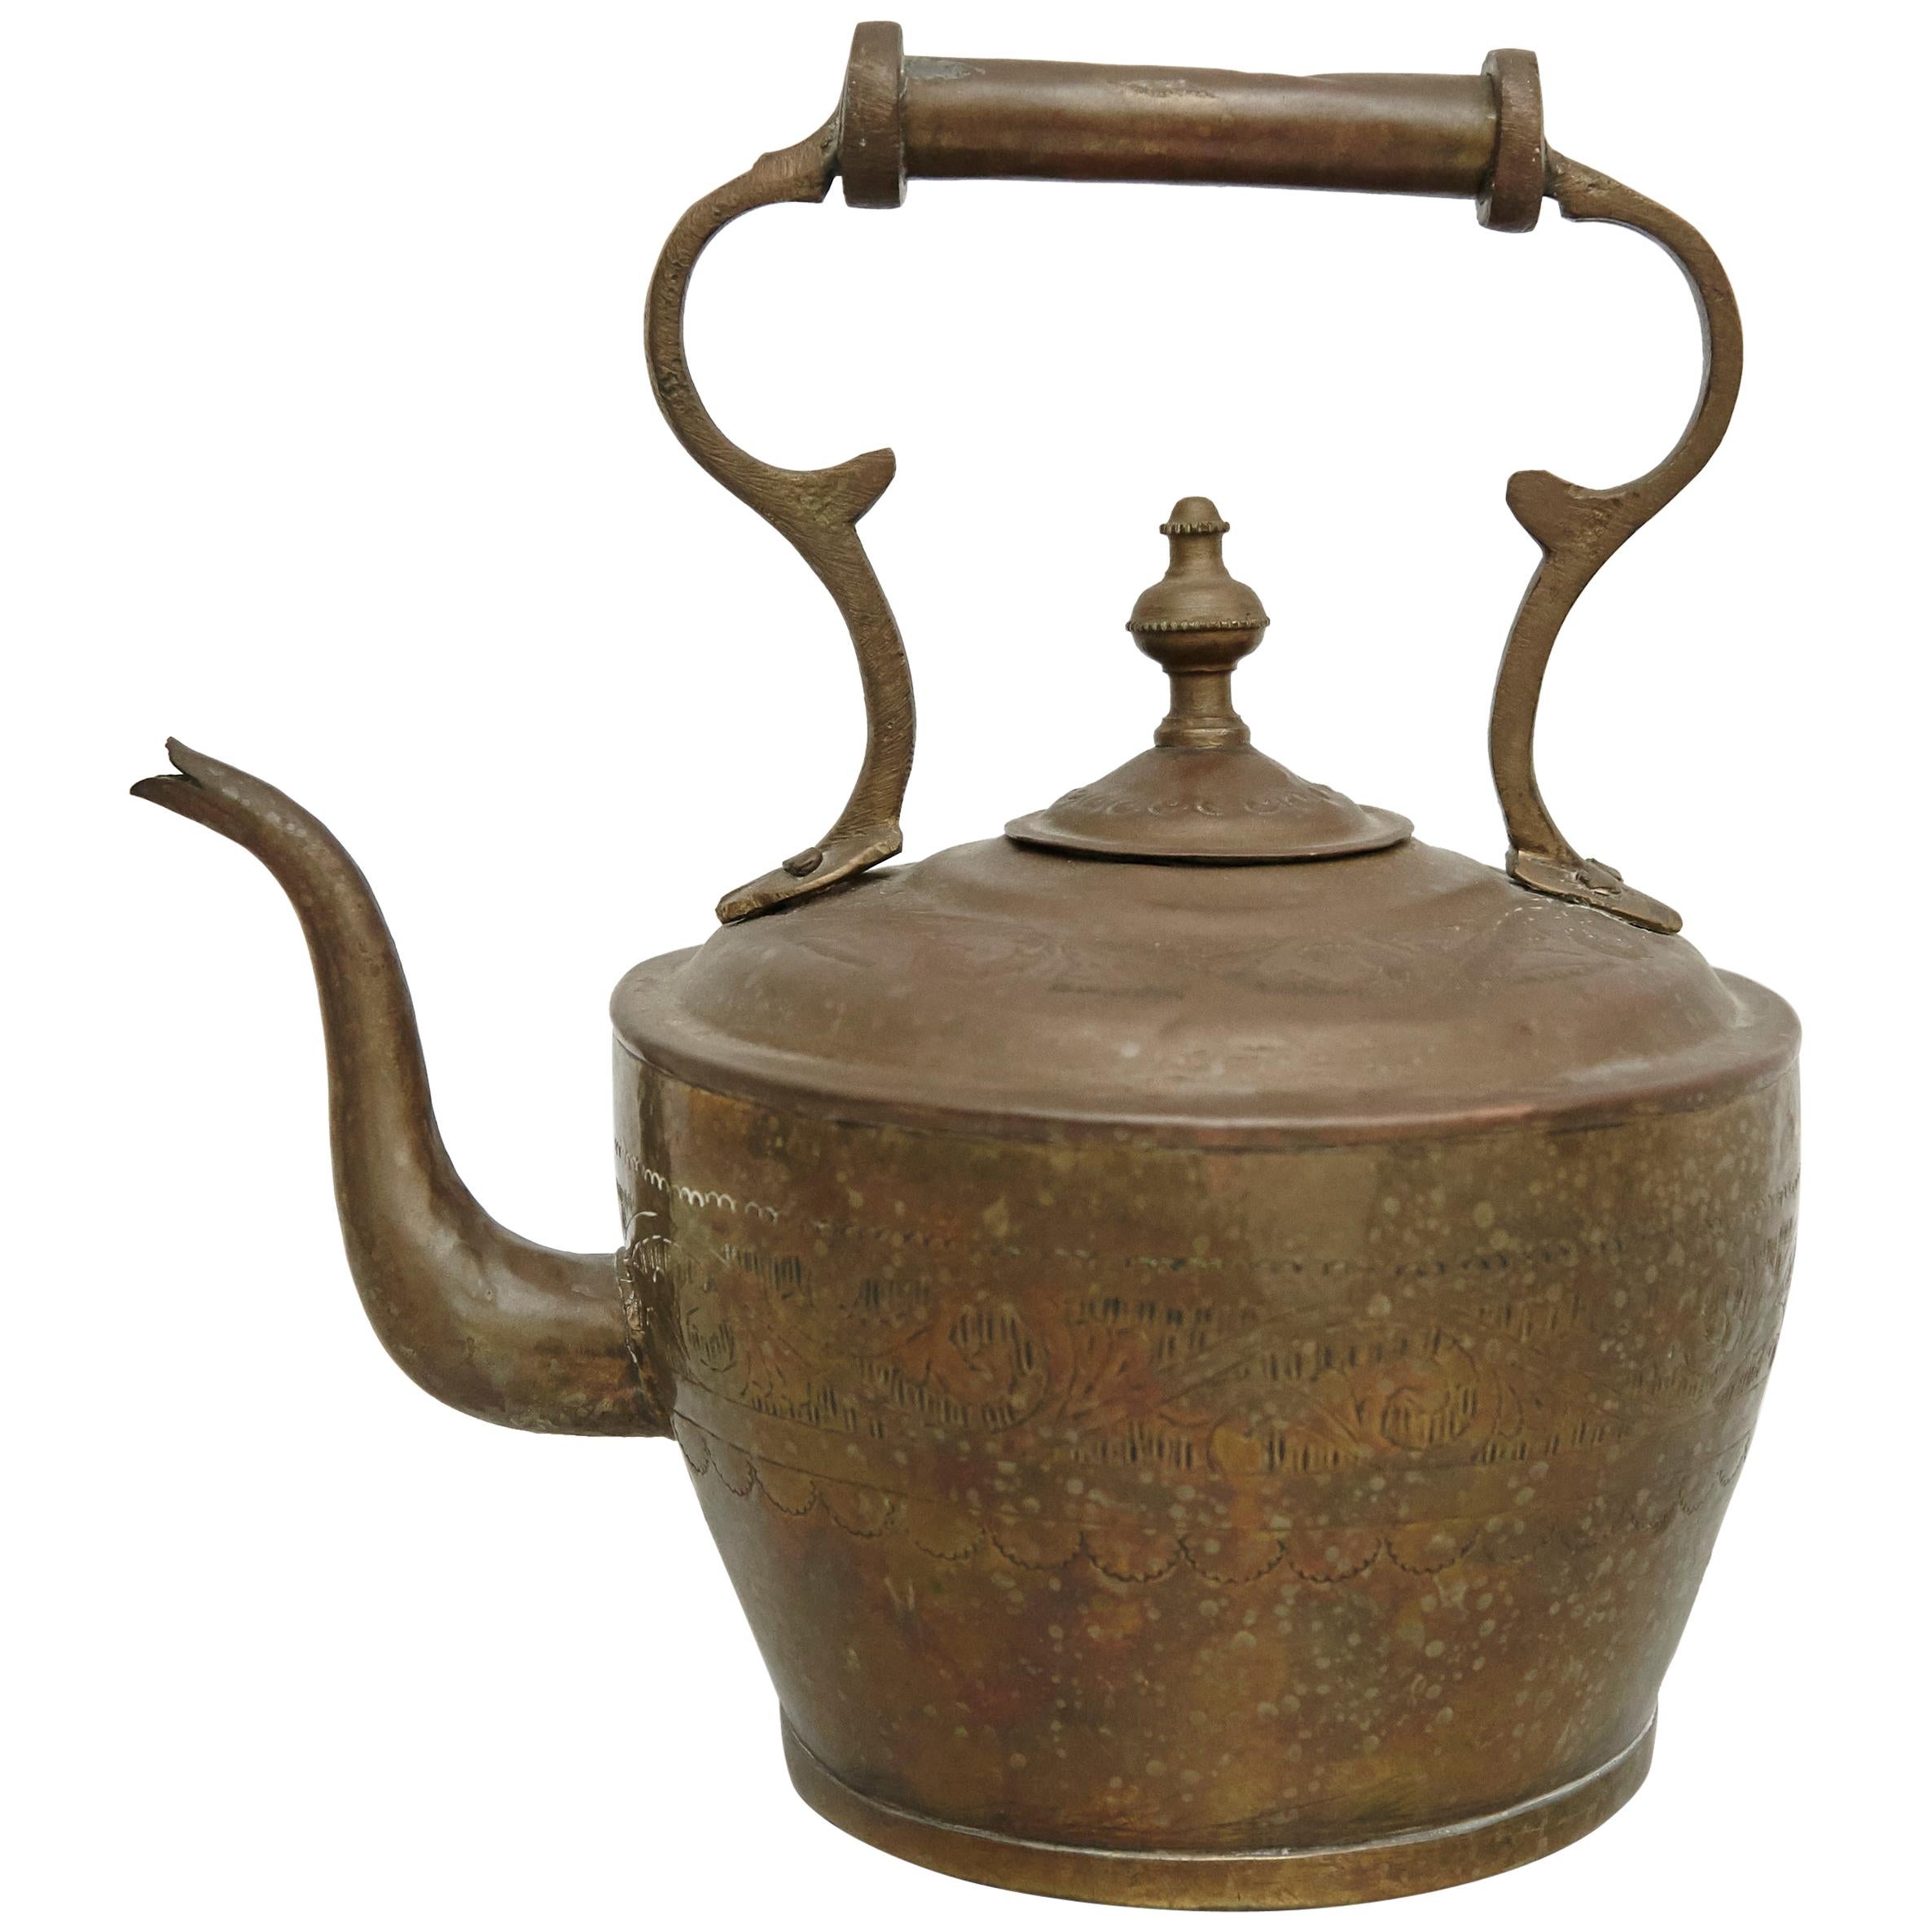 Early 20th Century French Country Brass Teapot